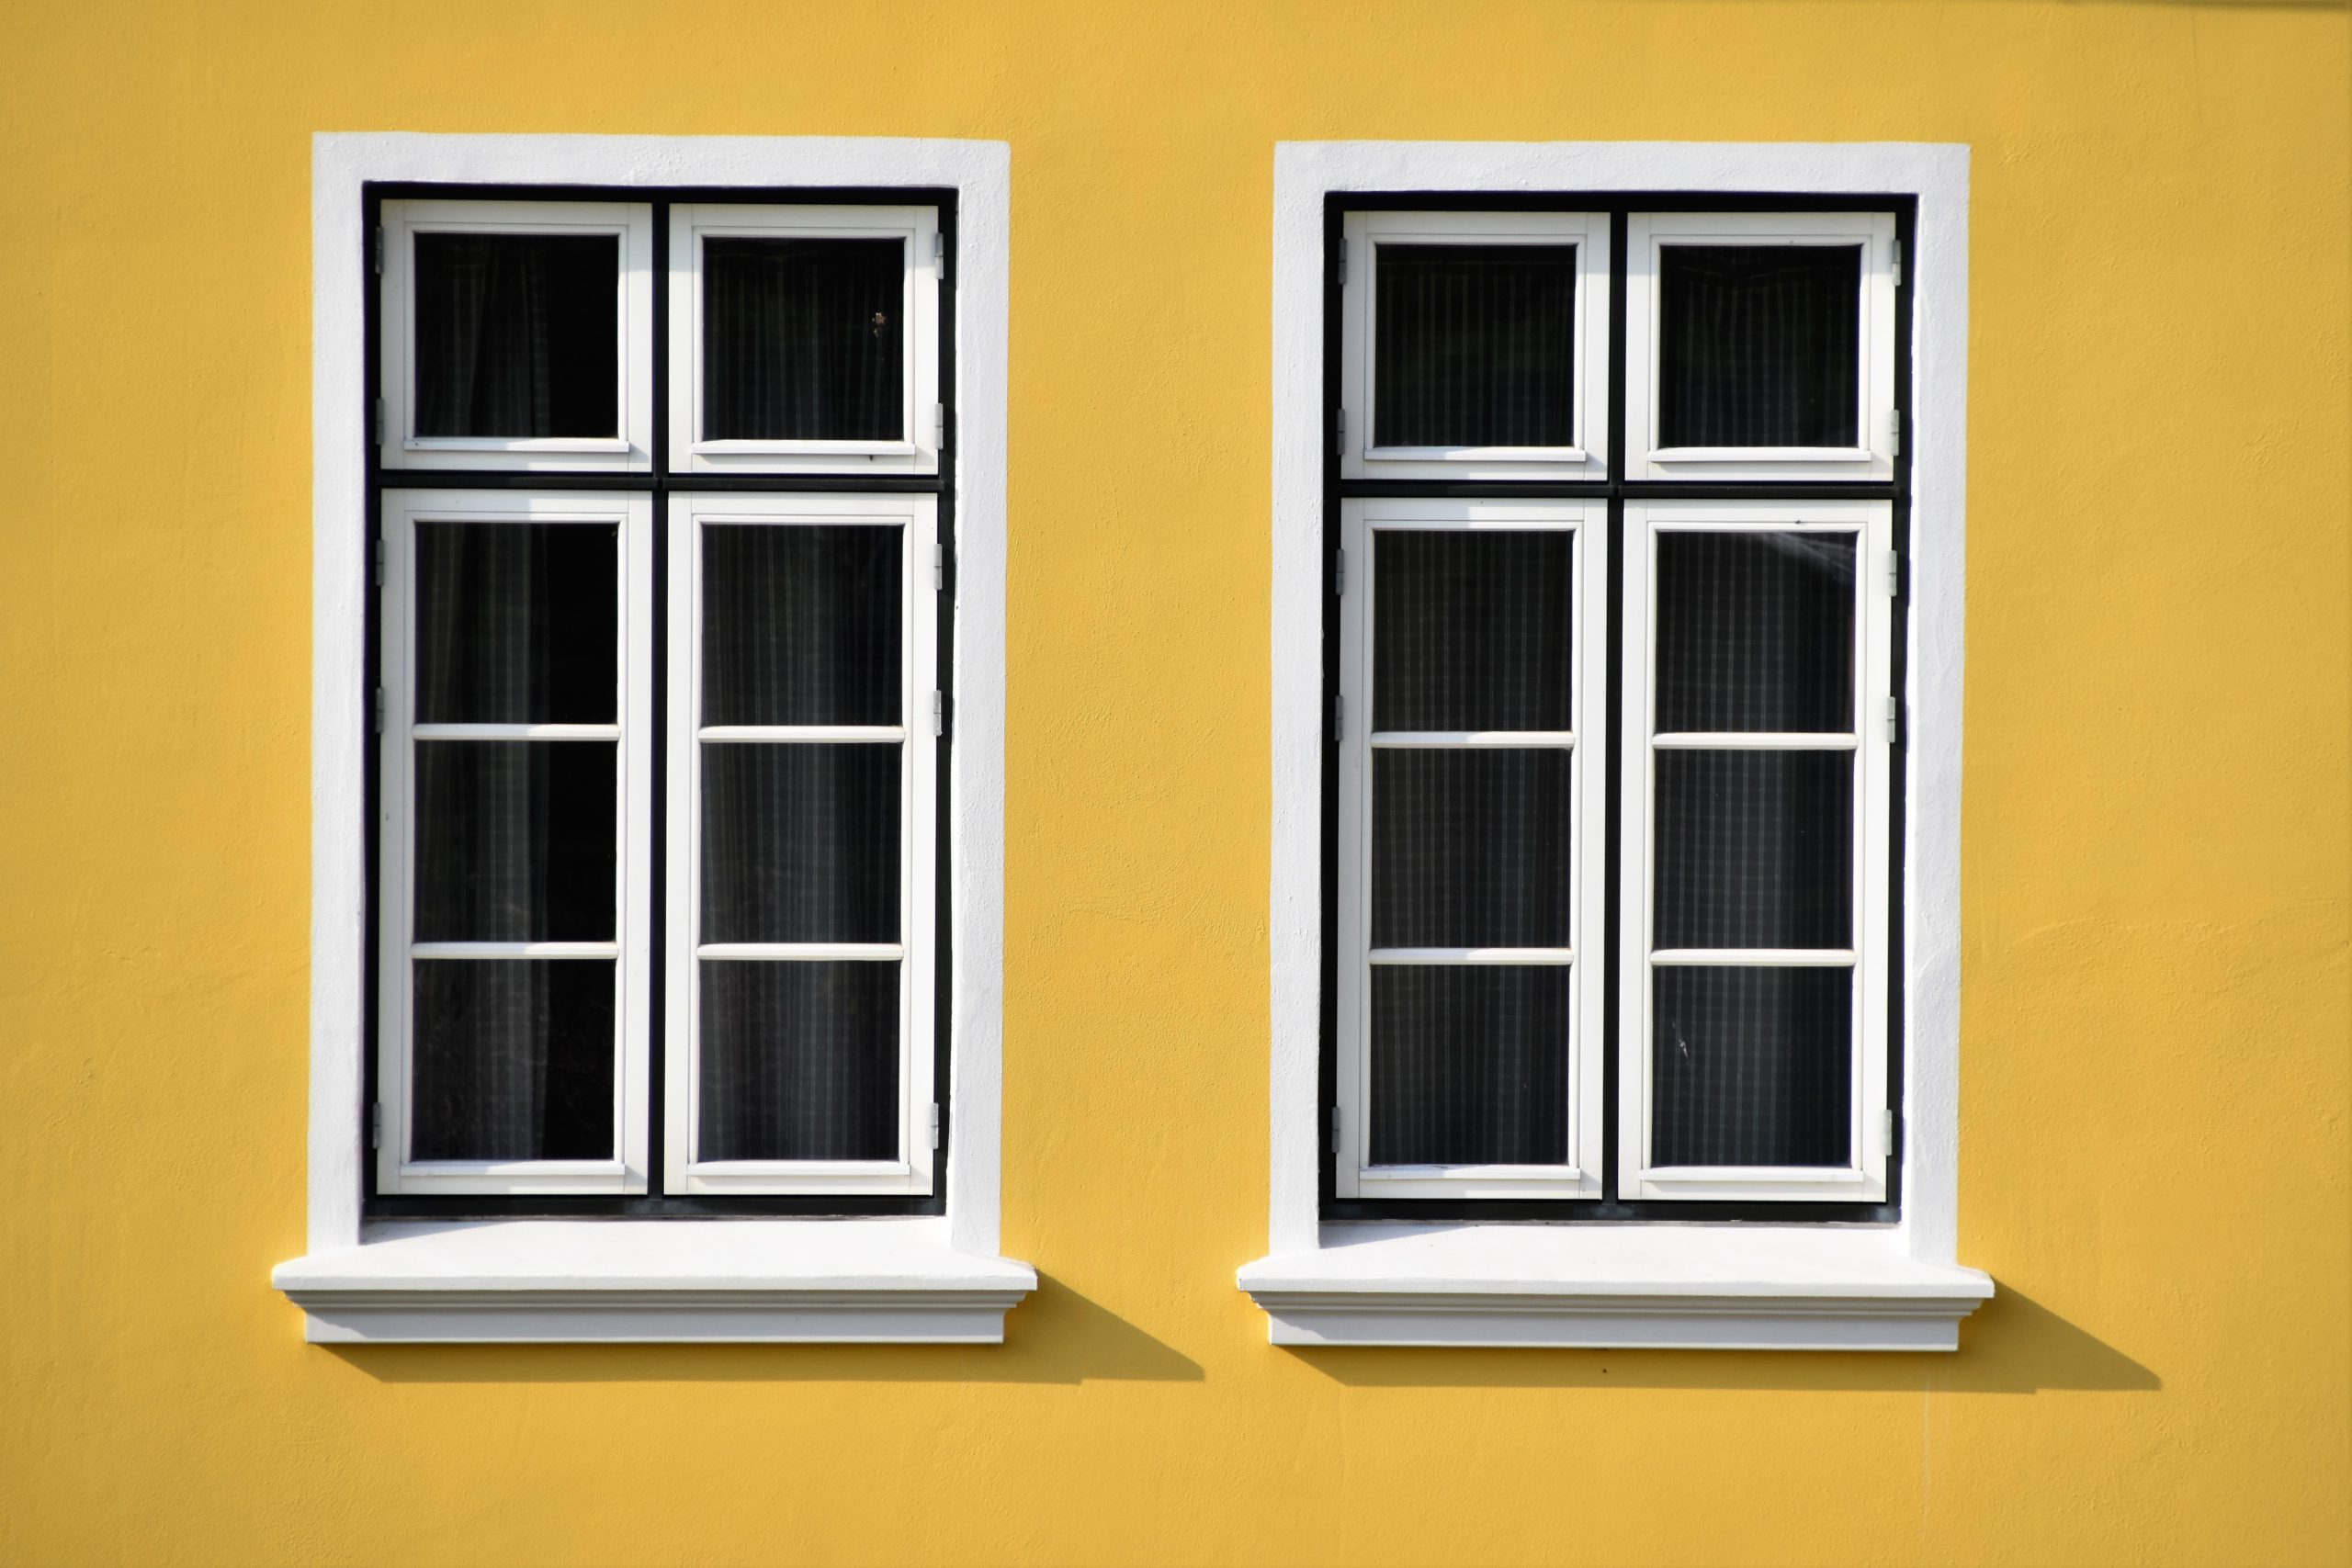 Set of two paned windows on a yellow wall with black curtains in behind